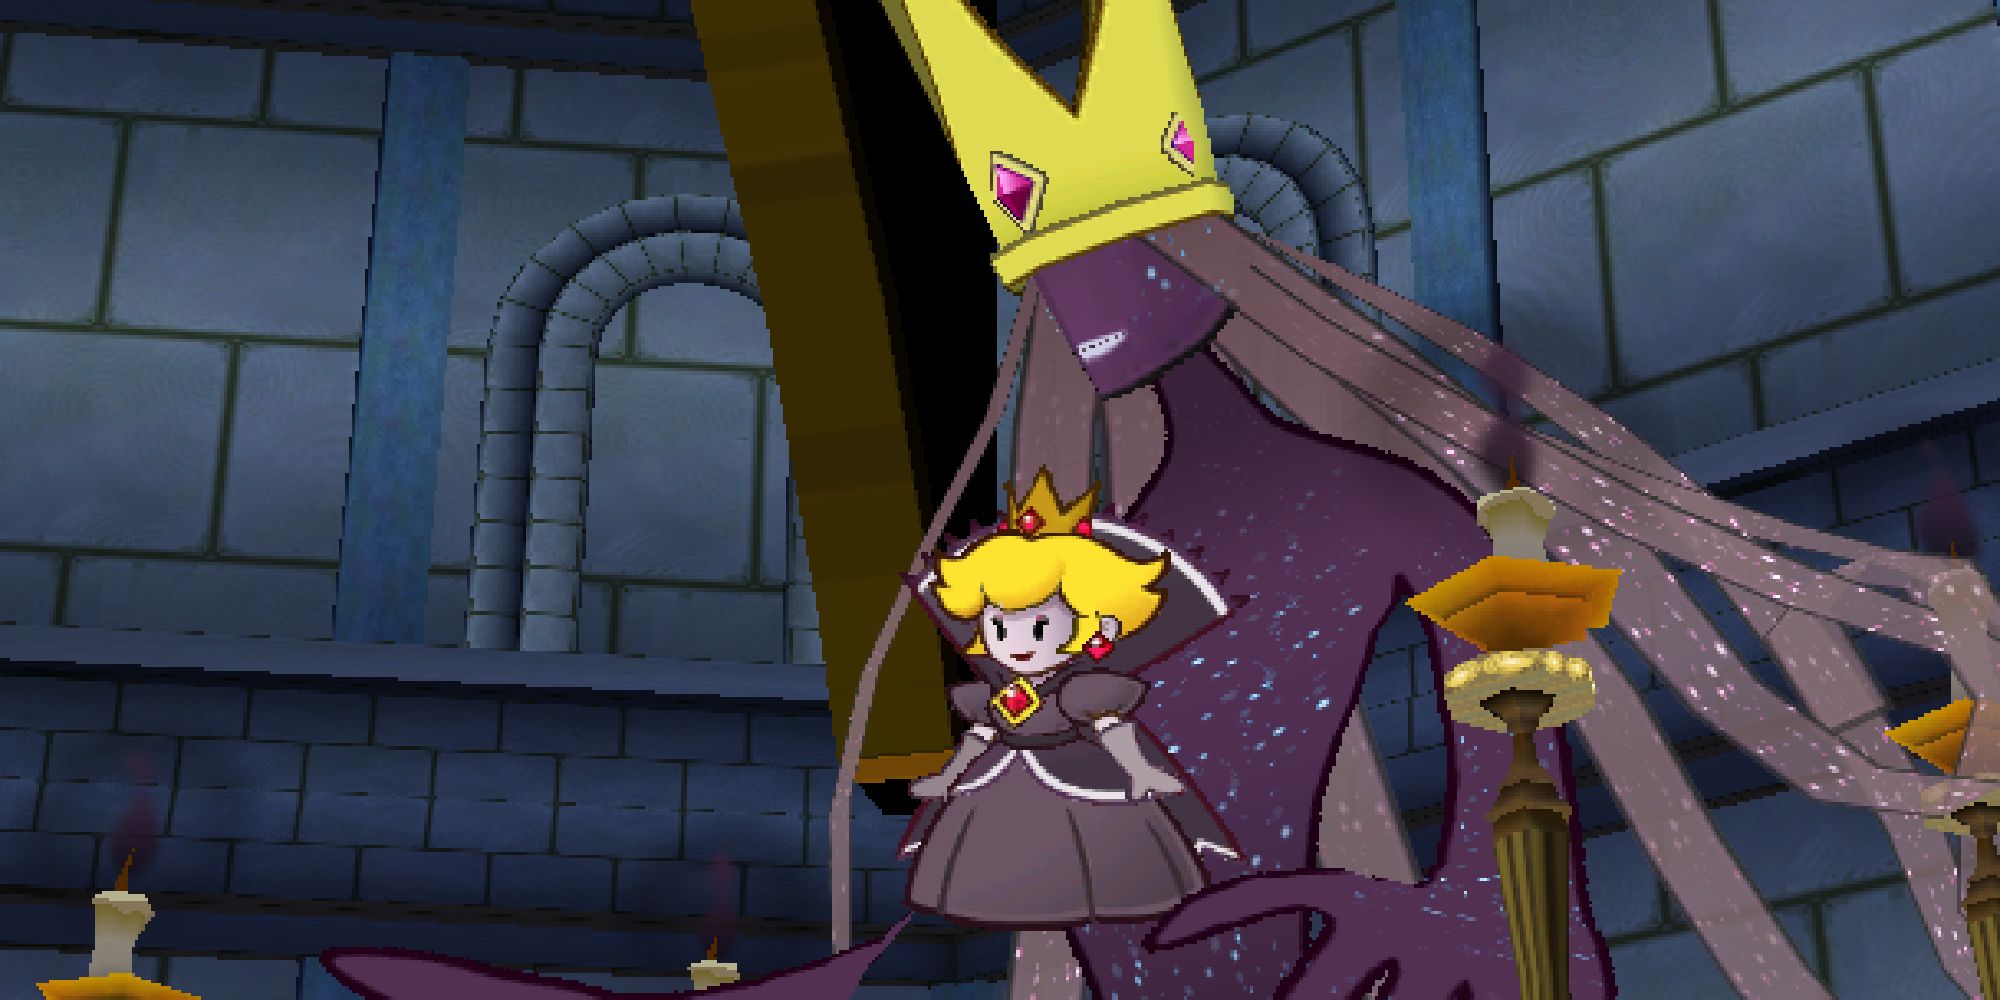 The Shadow Queen holding Shadow Peach in Paper Mario: The Thousand Year Door